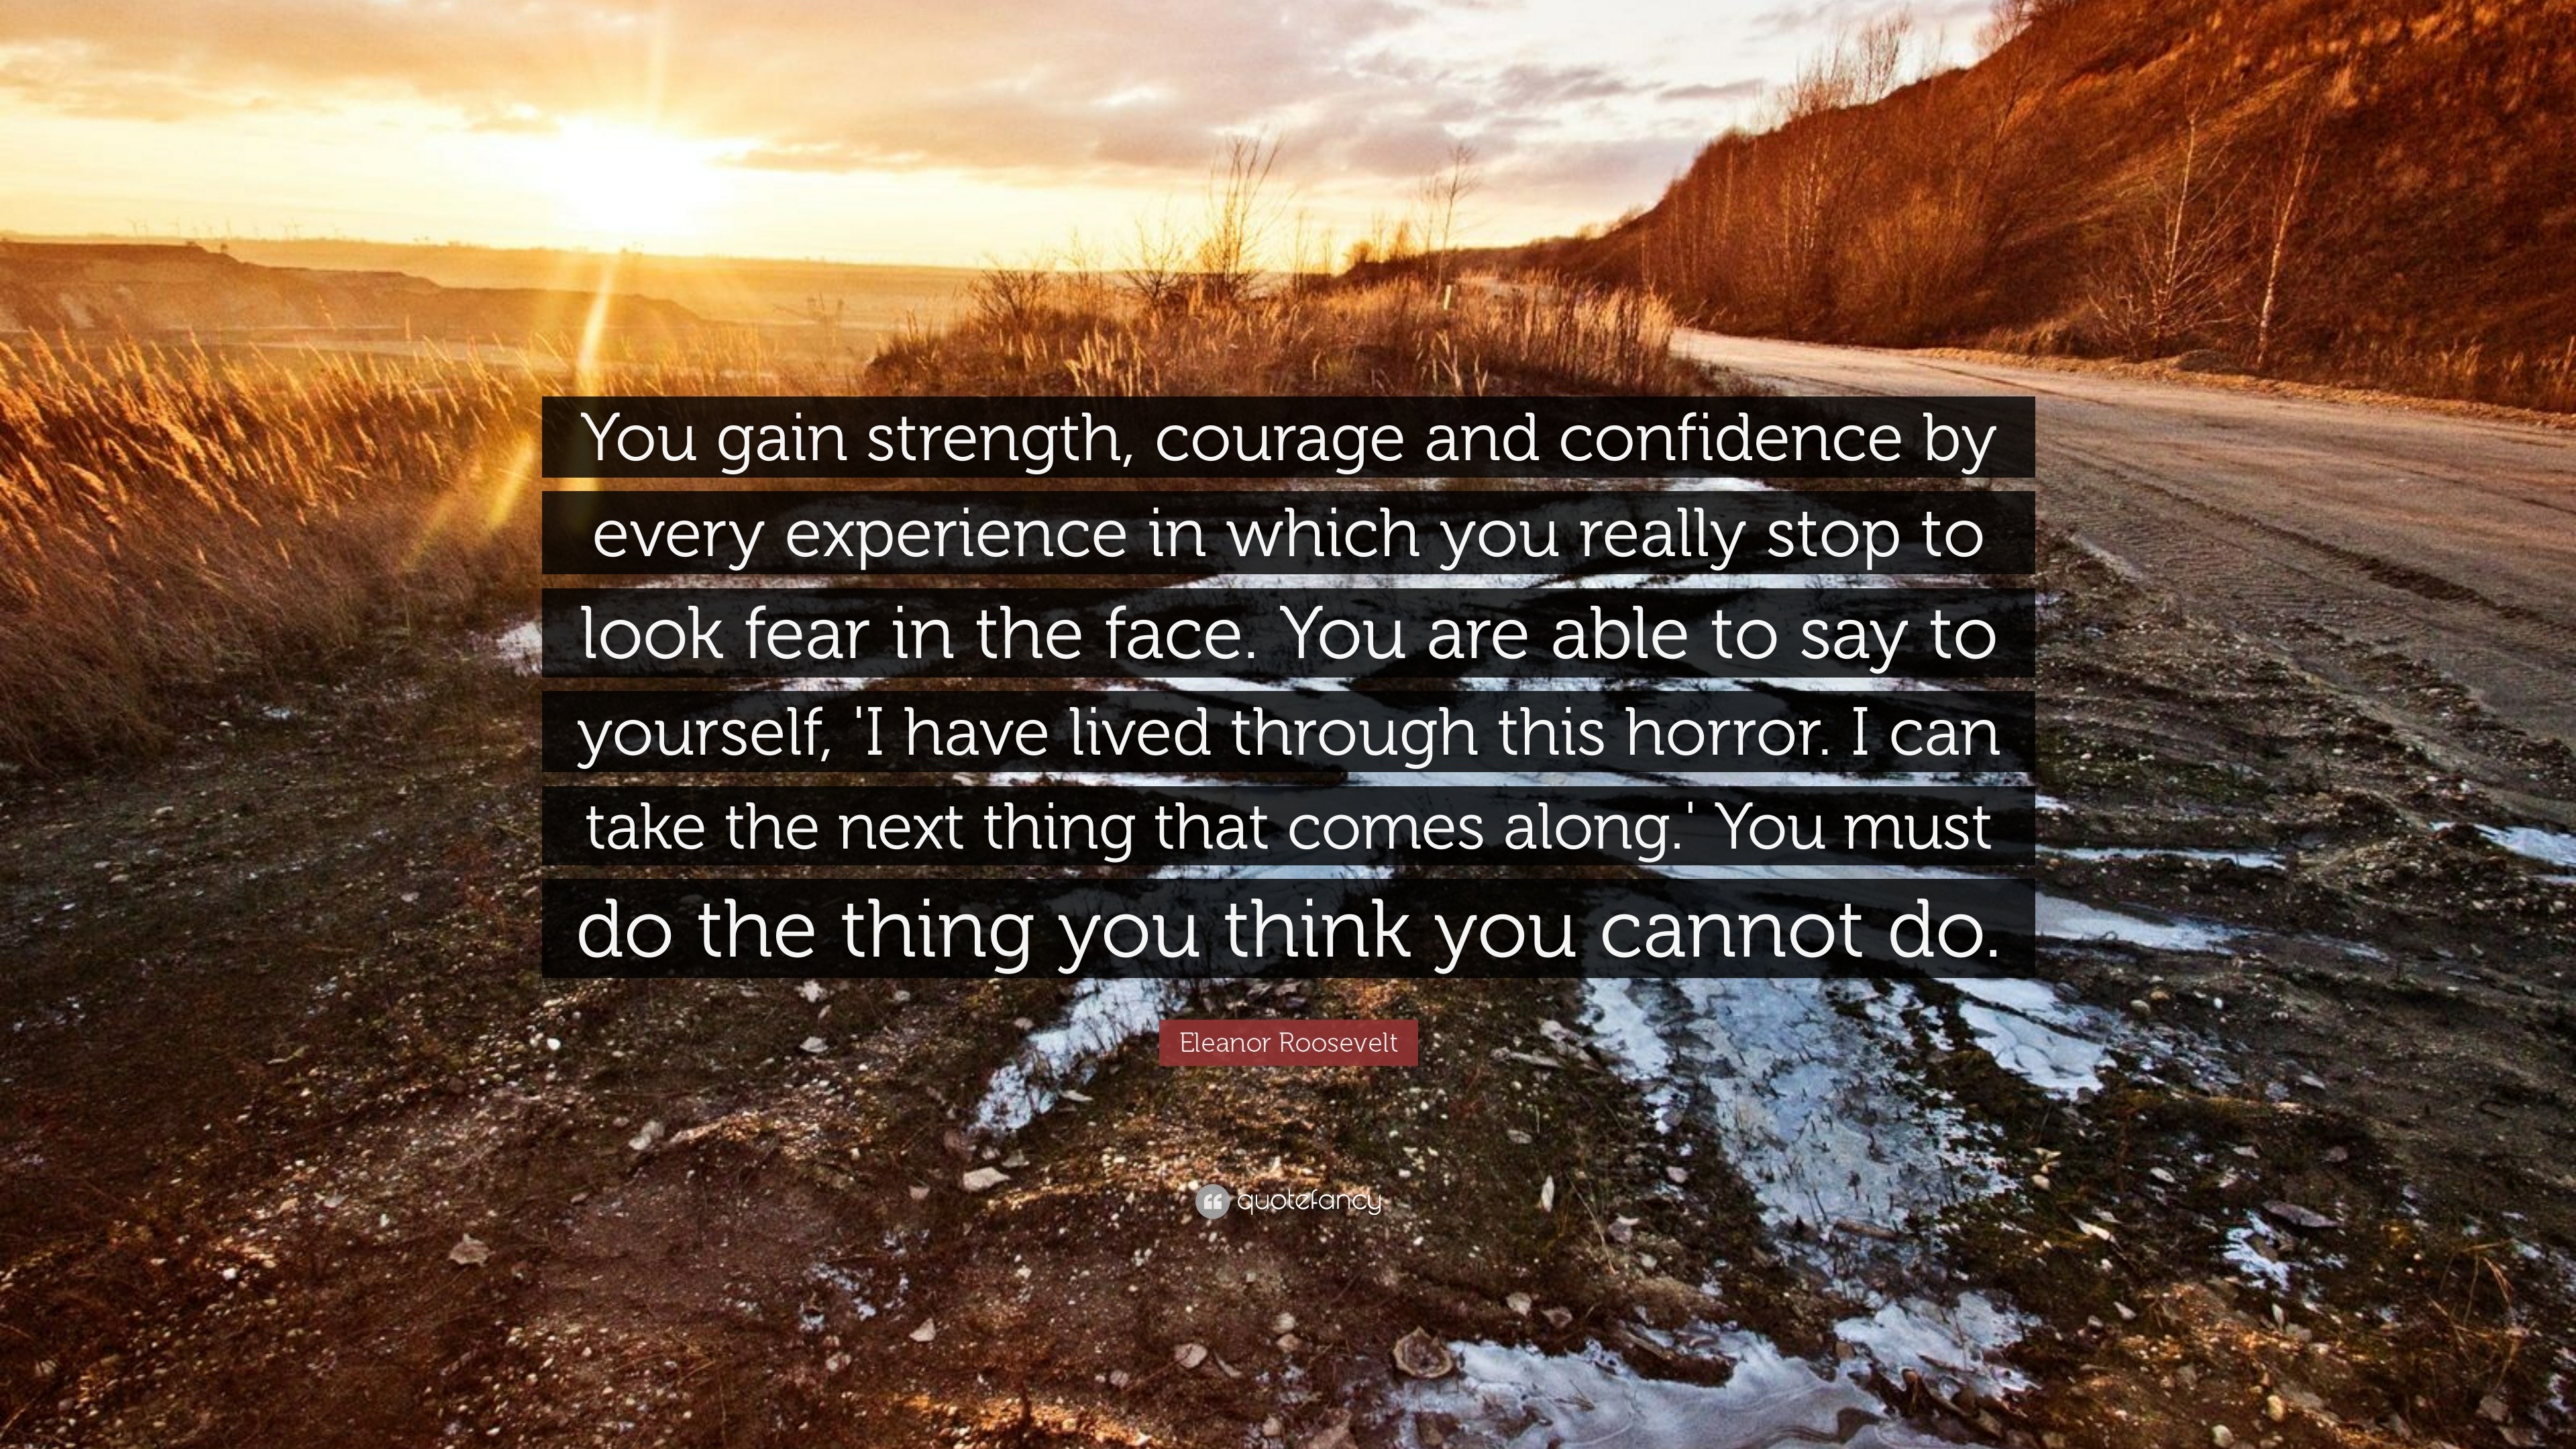 Eleanor Roosevelt Quote: “You gain strength, courage and confidence by